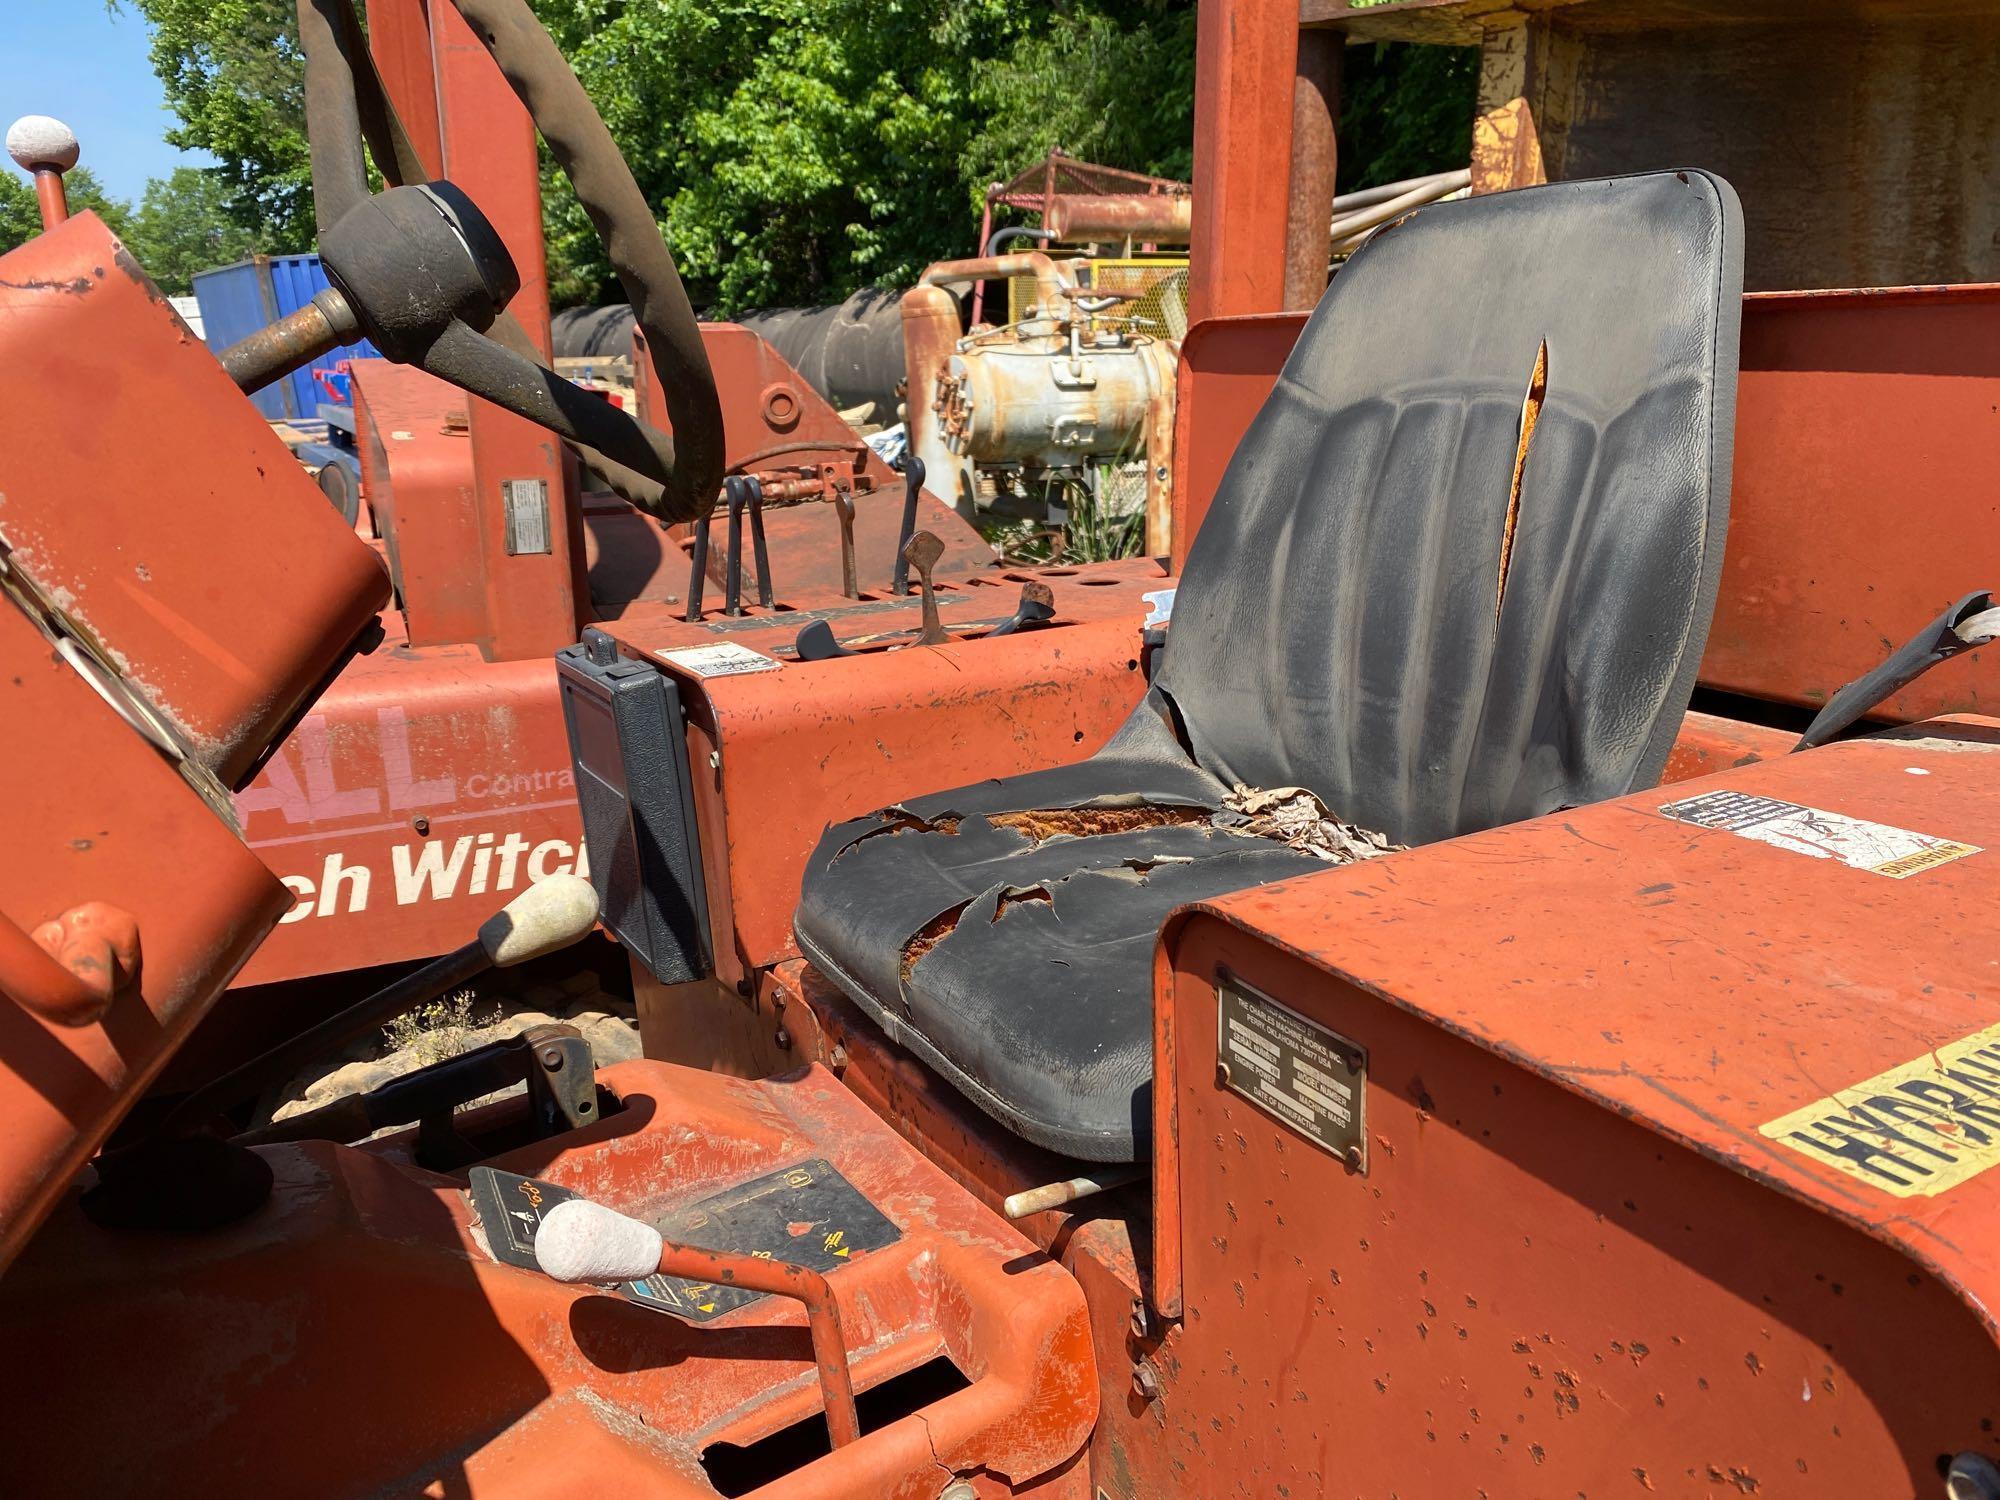 1998 Ditch Witch Trencher 5110